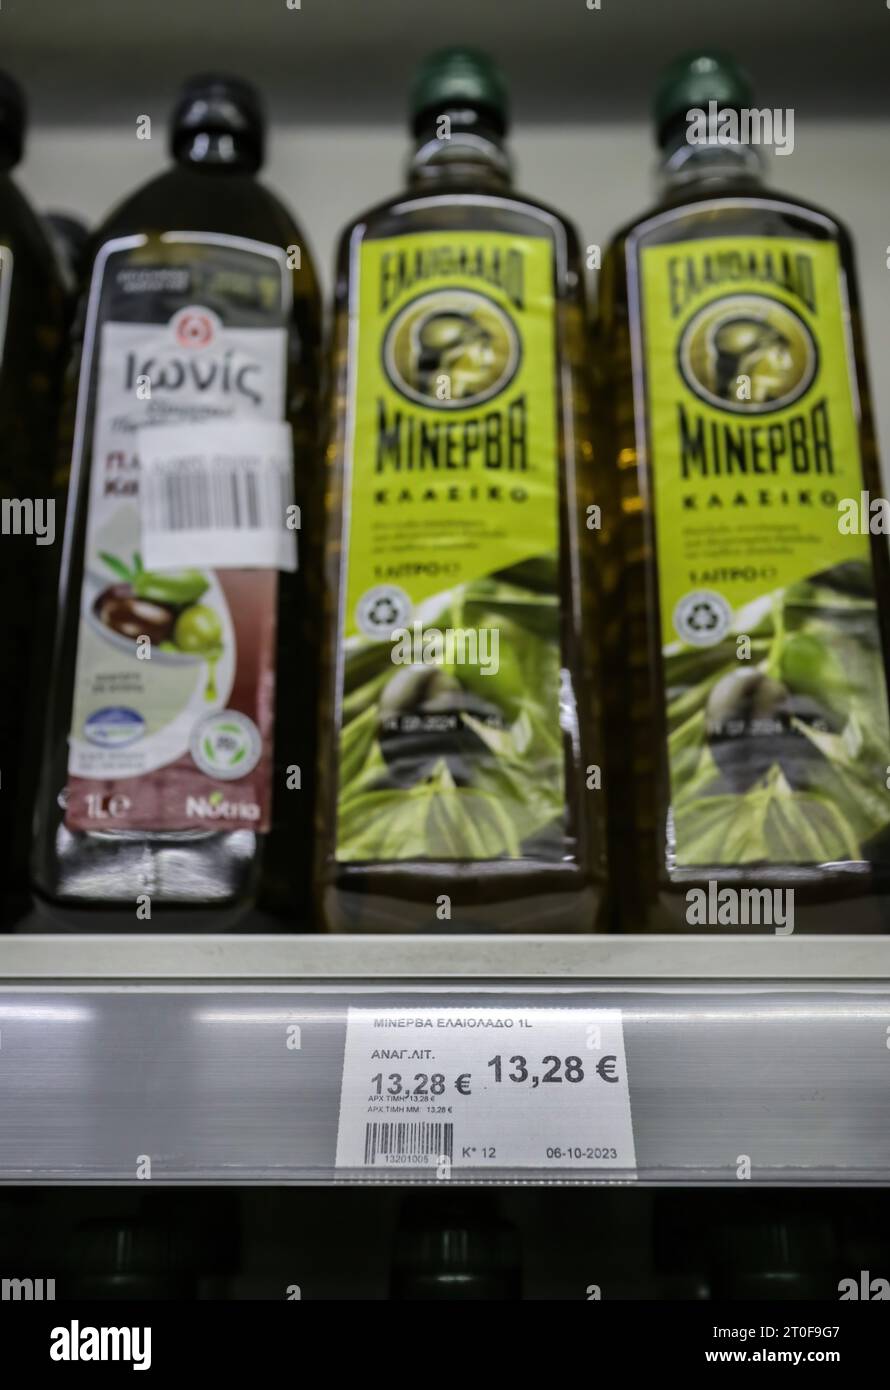 Athens, Greece. 06 October 2023.The price tag of olive oil in the local supermarket shows 13.28 euros per liter. Olive oil is an essential part of culture and cuisine of the country. Greece and Italy are the second and third largest producers of olive oil, according to the International Olive Council. Credit: Dimitris Aspiotis/Alamy Live News Stock Photo